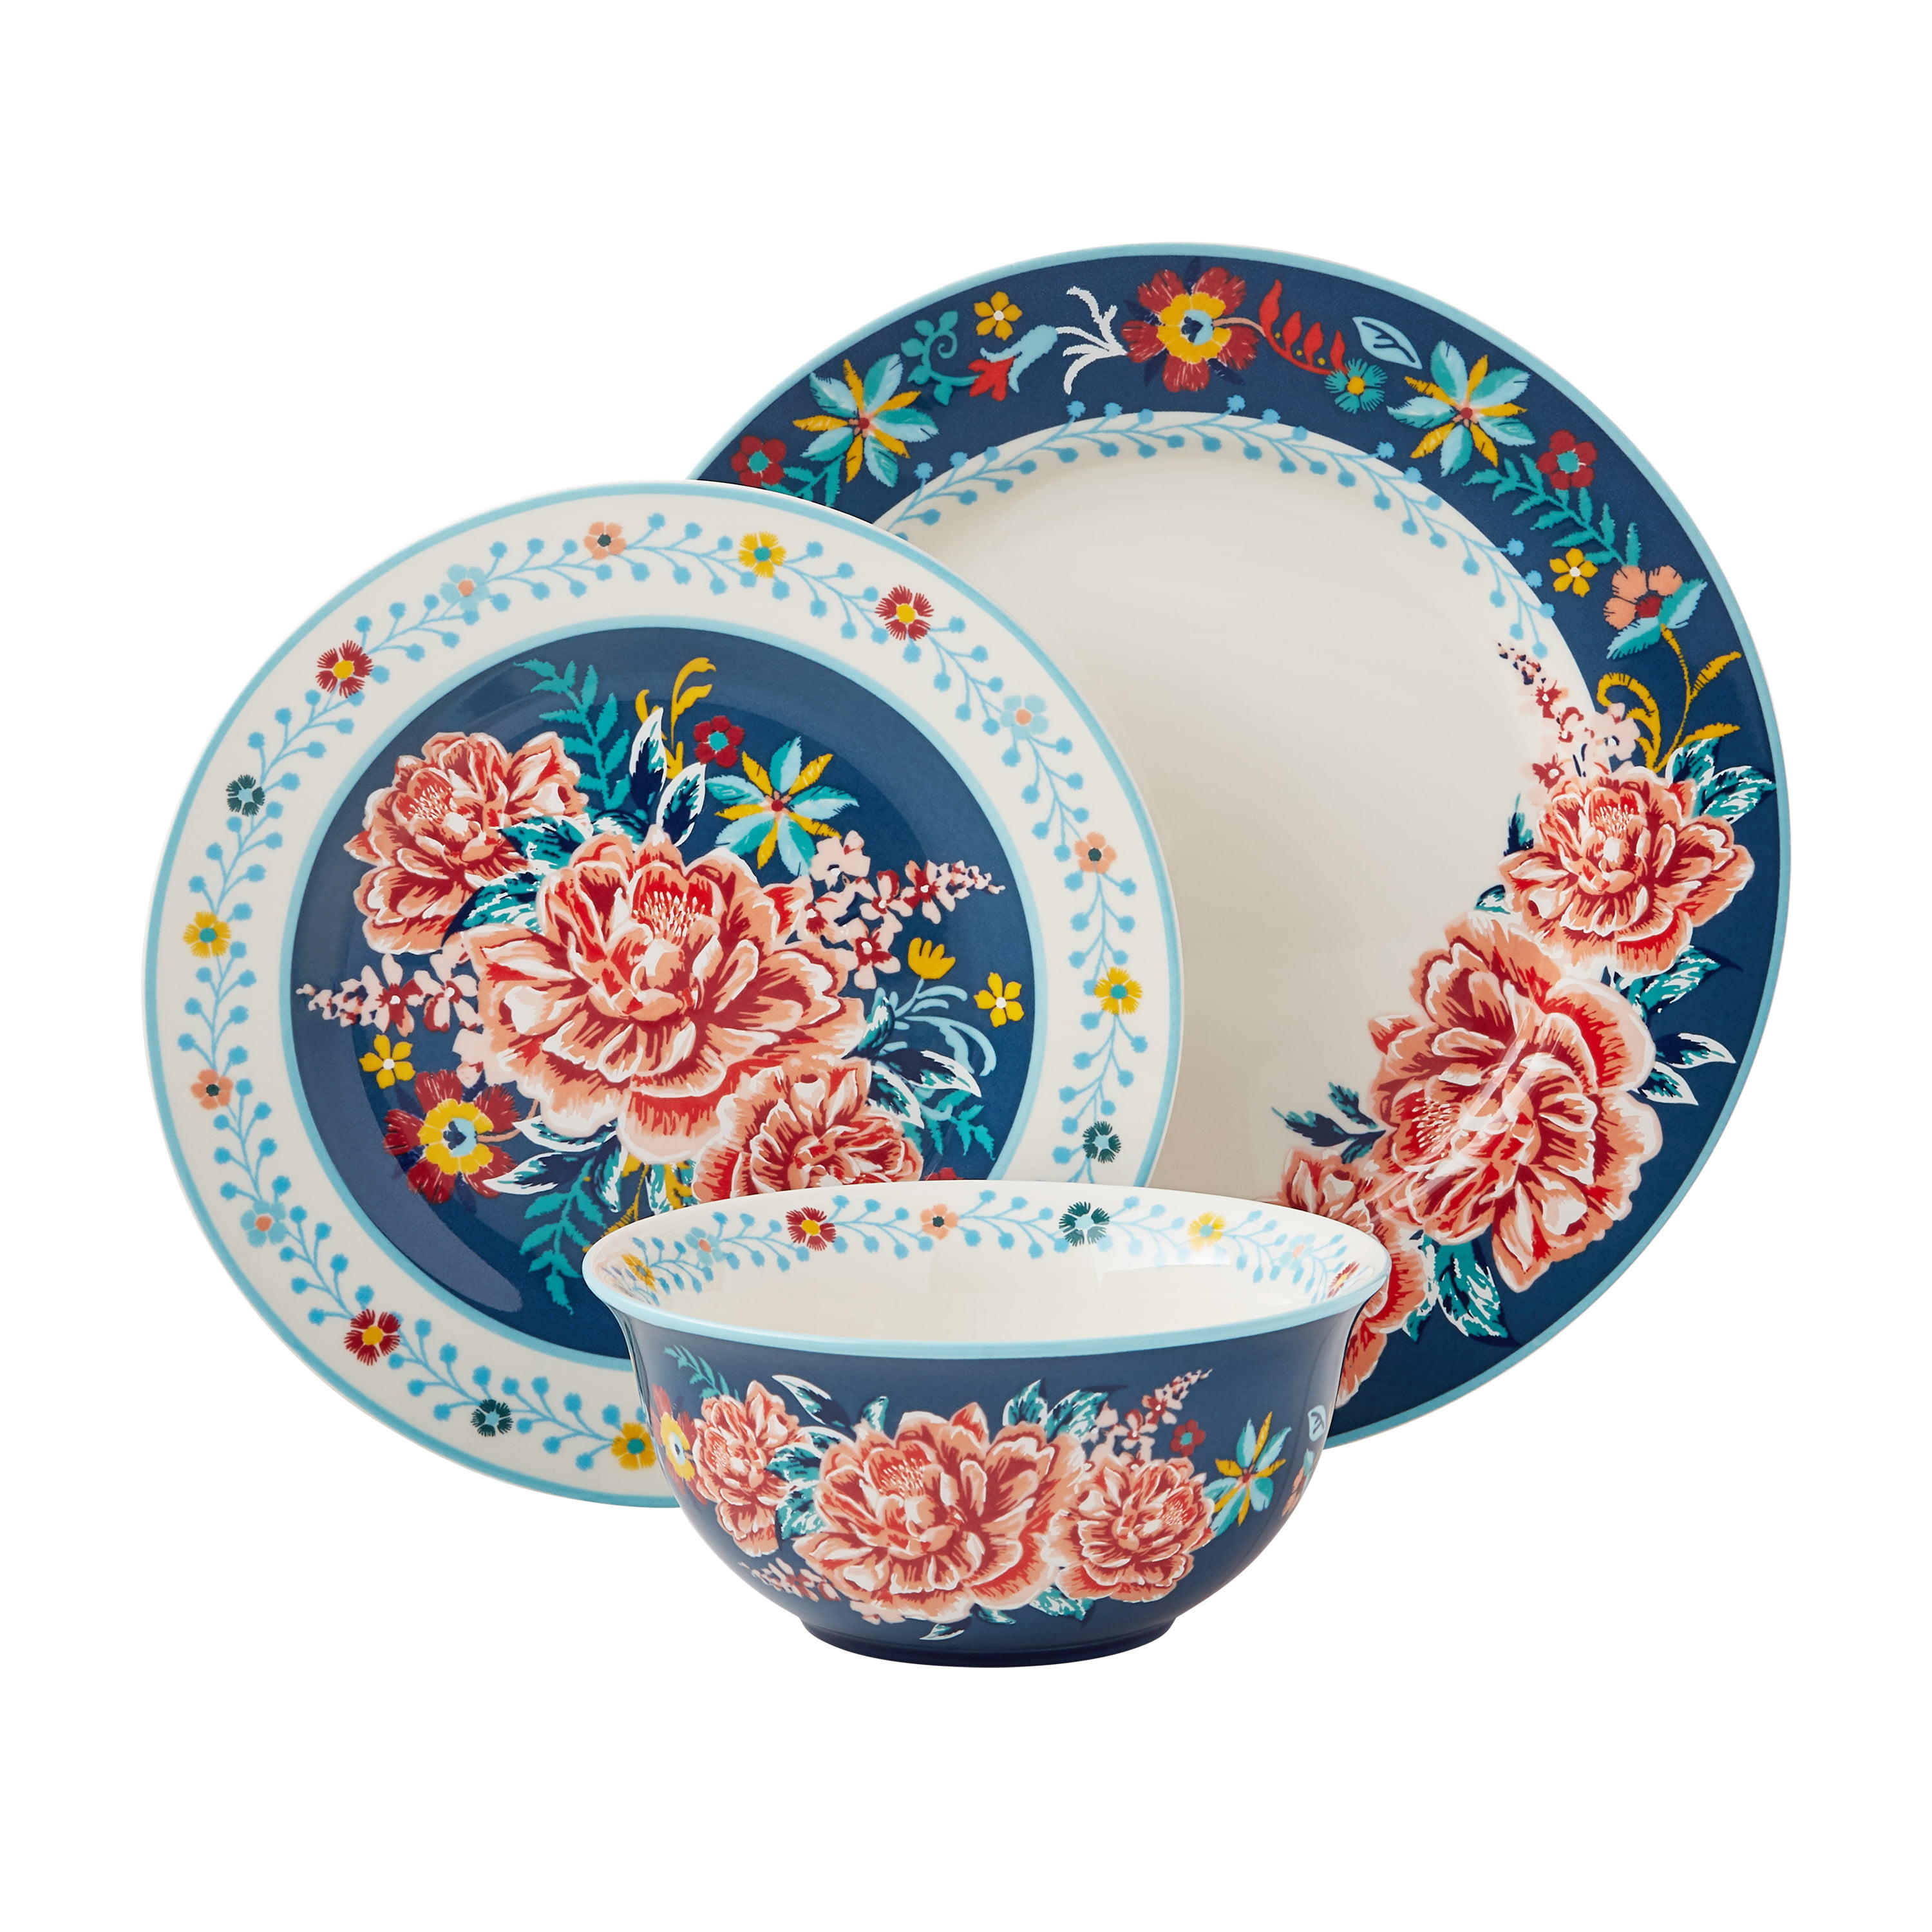 The Pioneer Woman Floral Medley Mug Rack with Appetizer Plates and